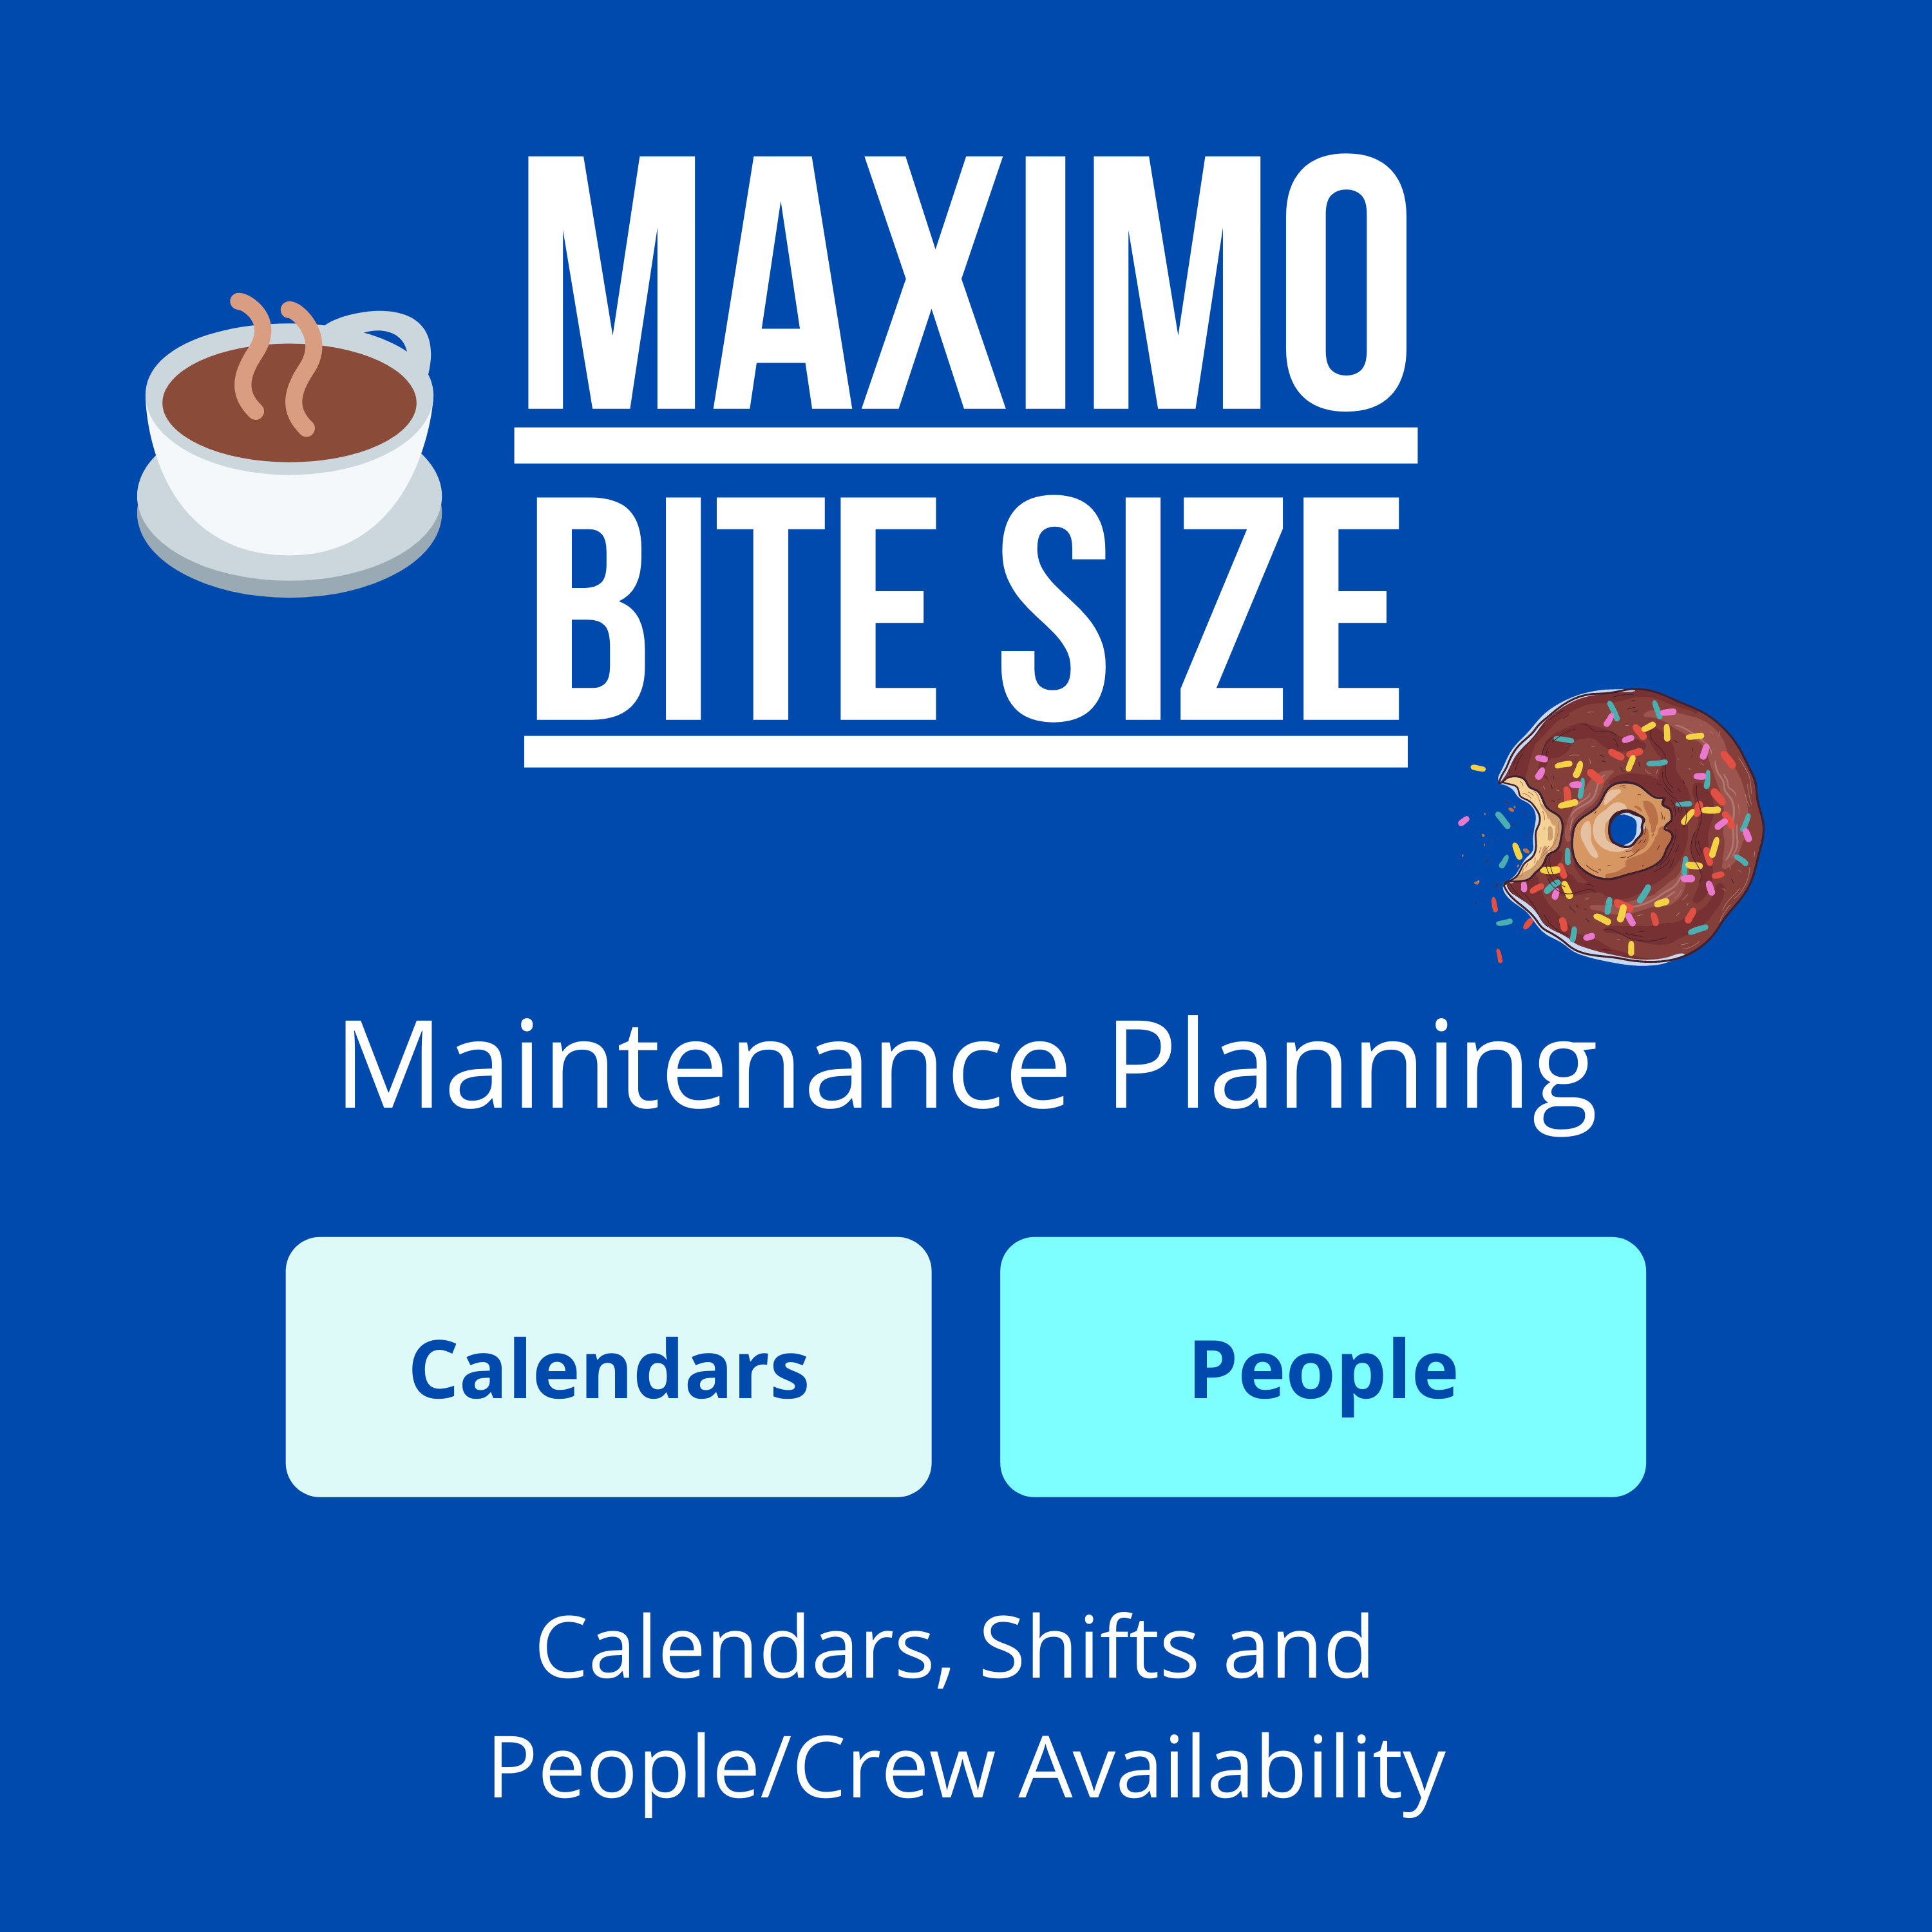 Calendars, Shifts and People/Crew Availability